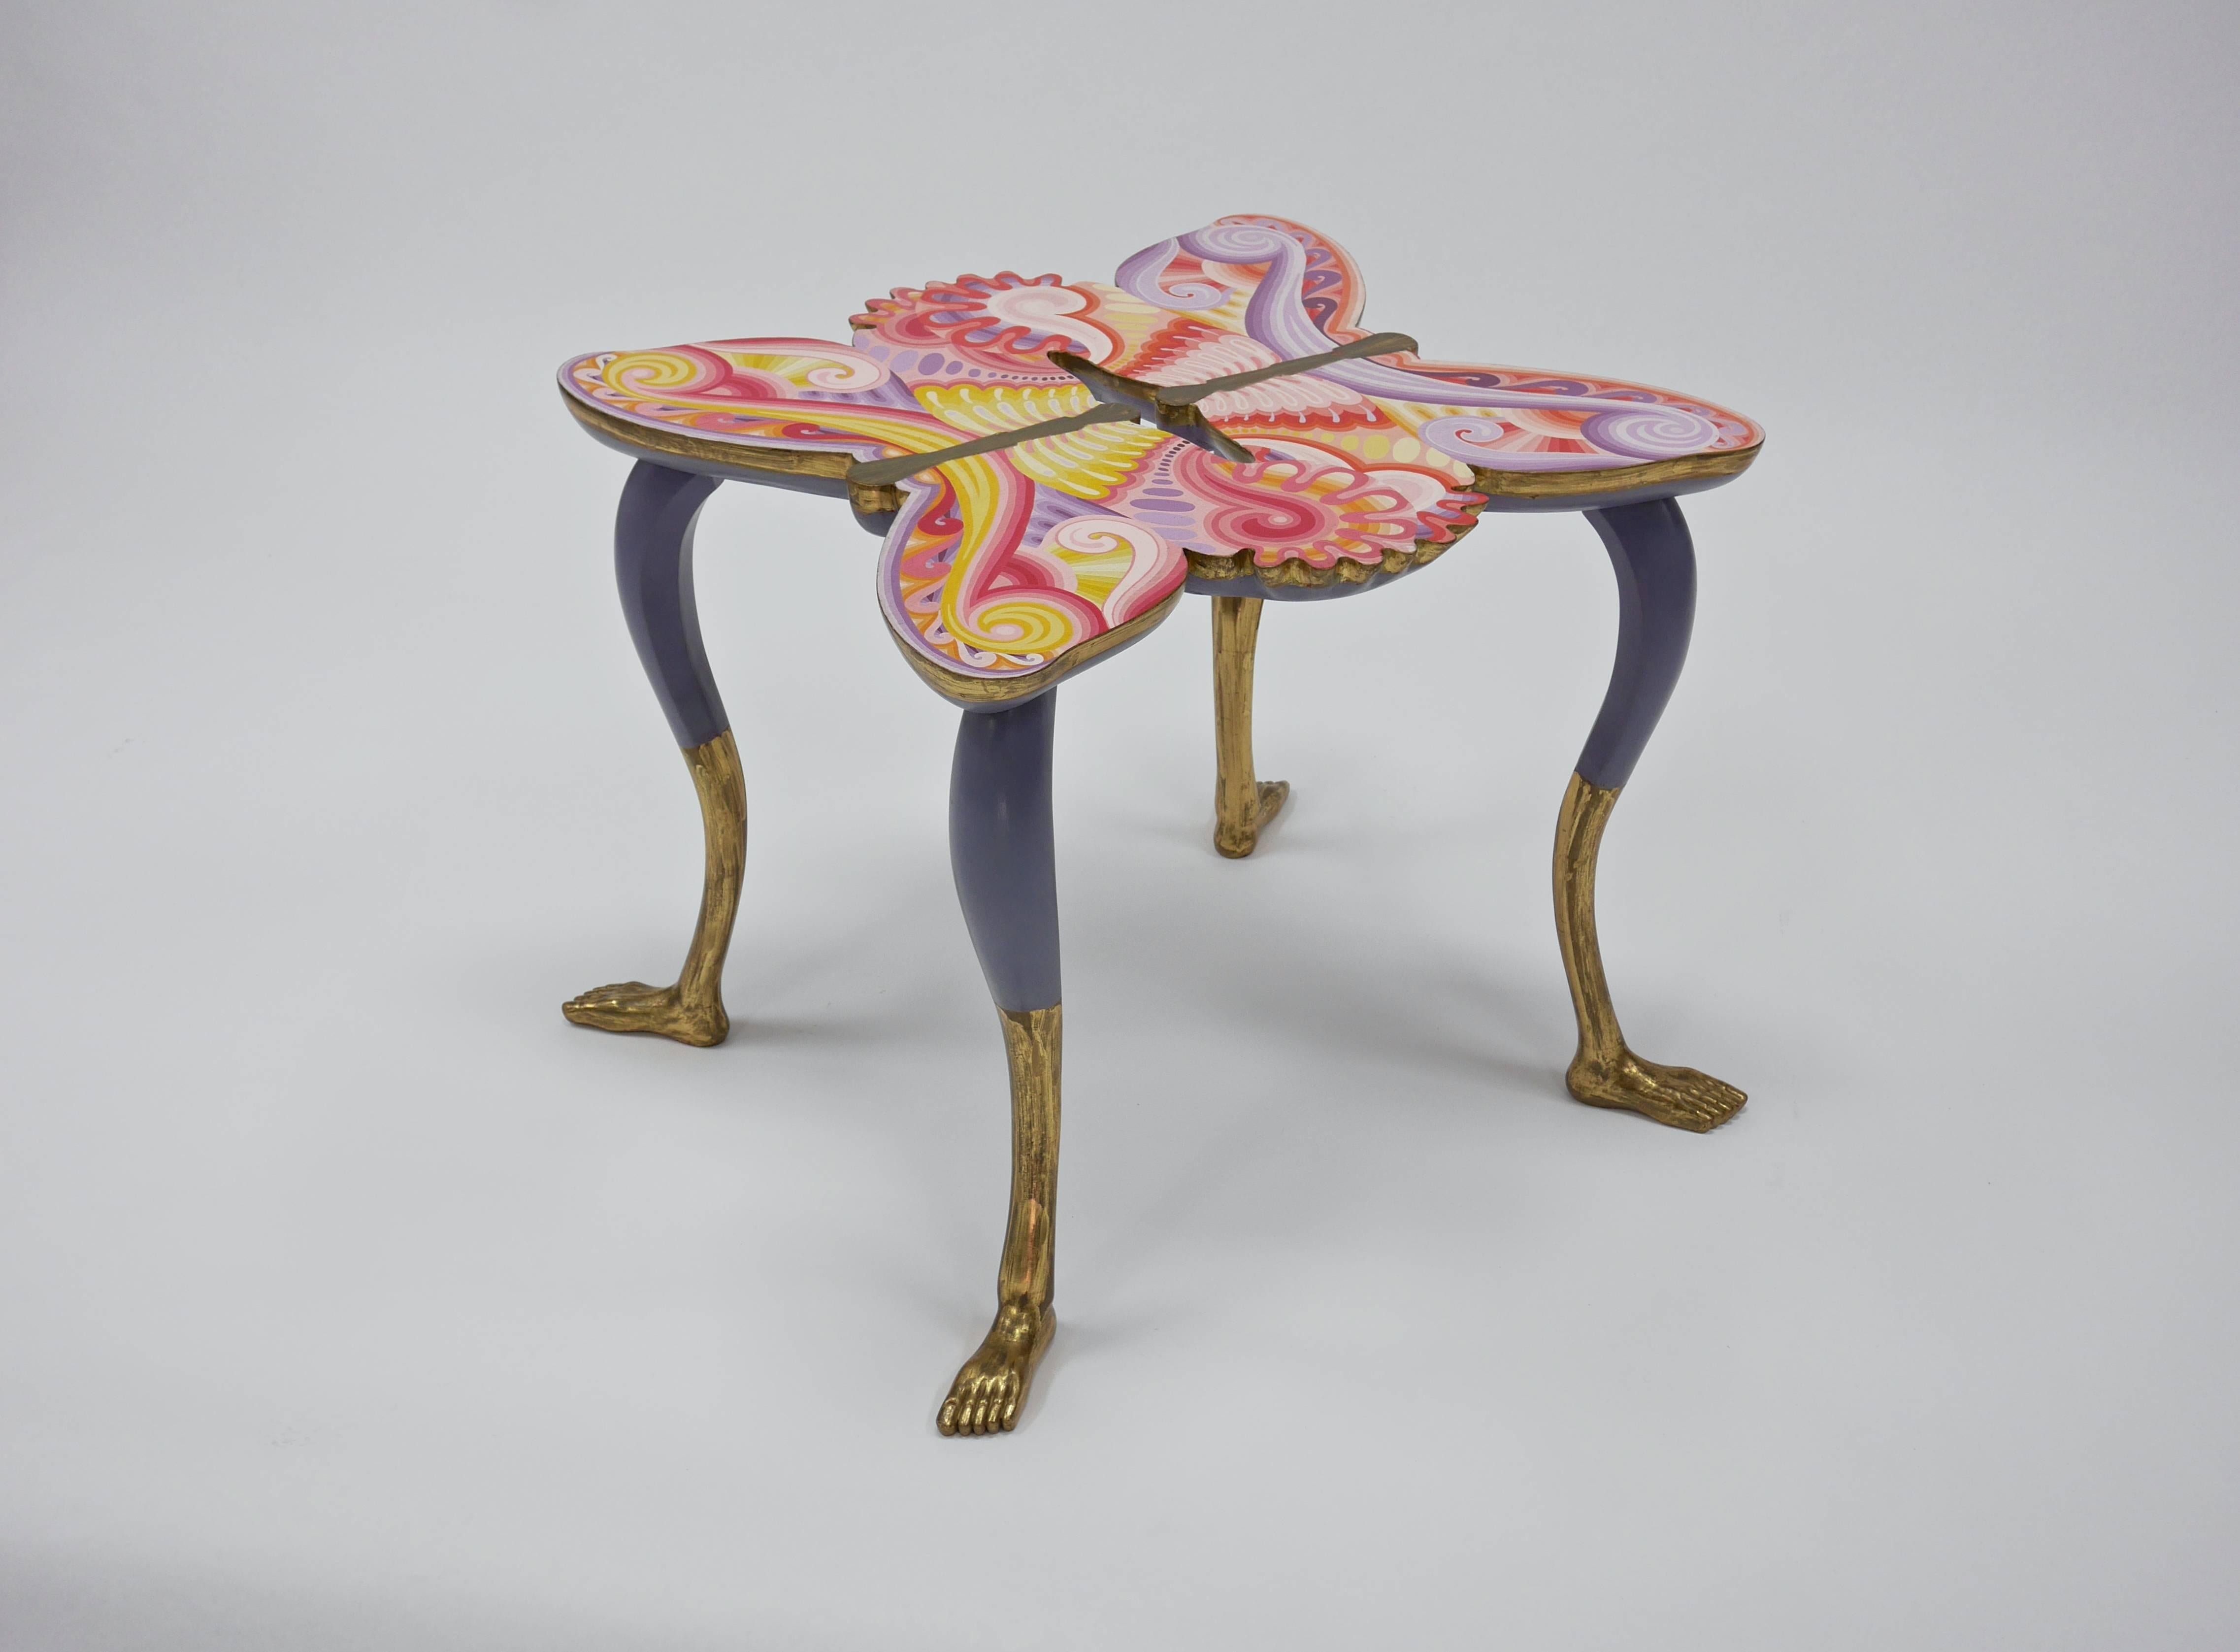 Rare Pedro Friedeberg (Mexican, b. 1936) mariposa table.
Hand-painted in bright colors and gilded legs. Signed 